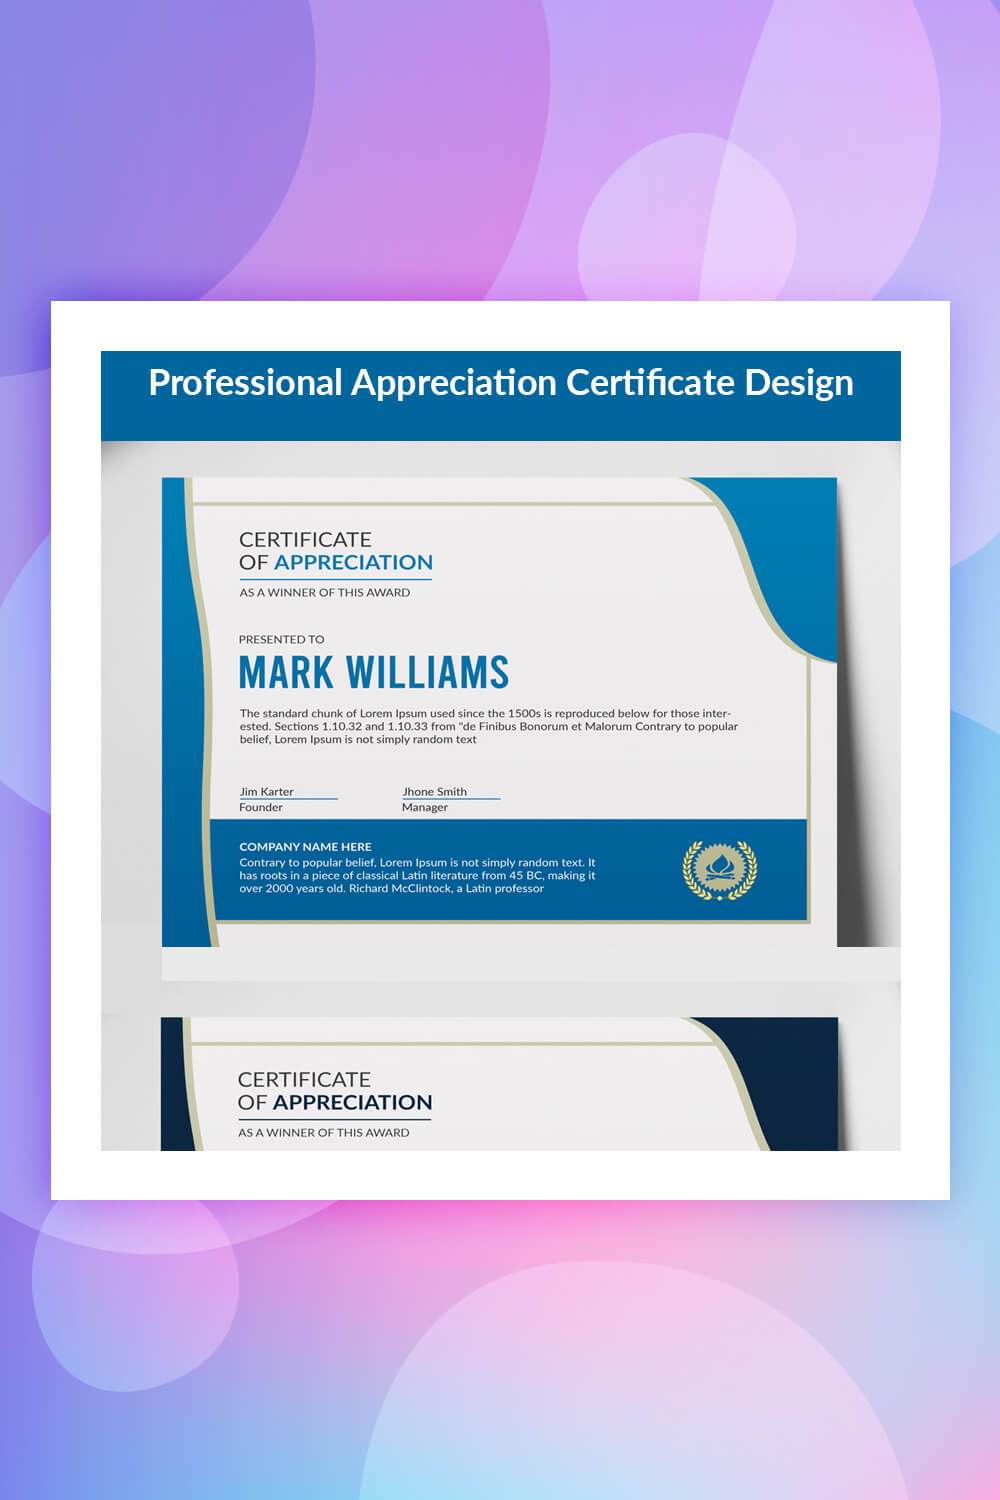 28 Attention Grabbing Certificate Templates – Colorlib With Regard To No Certificate Templates Could Be Found